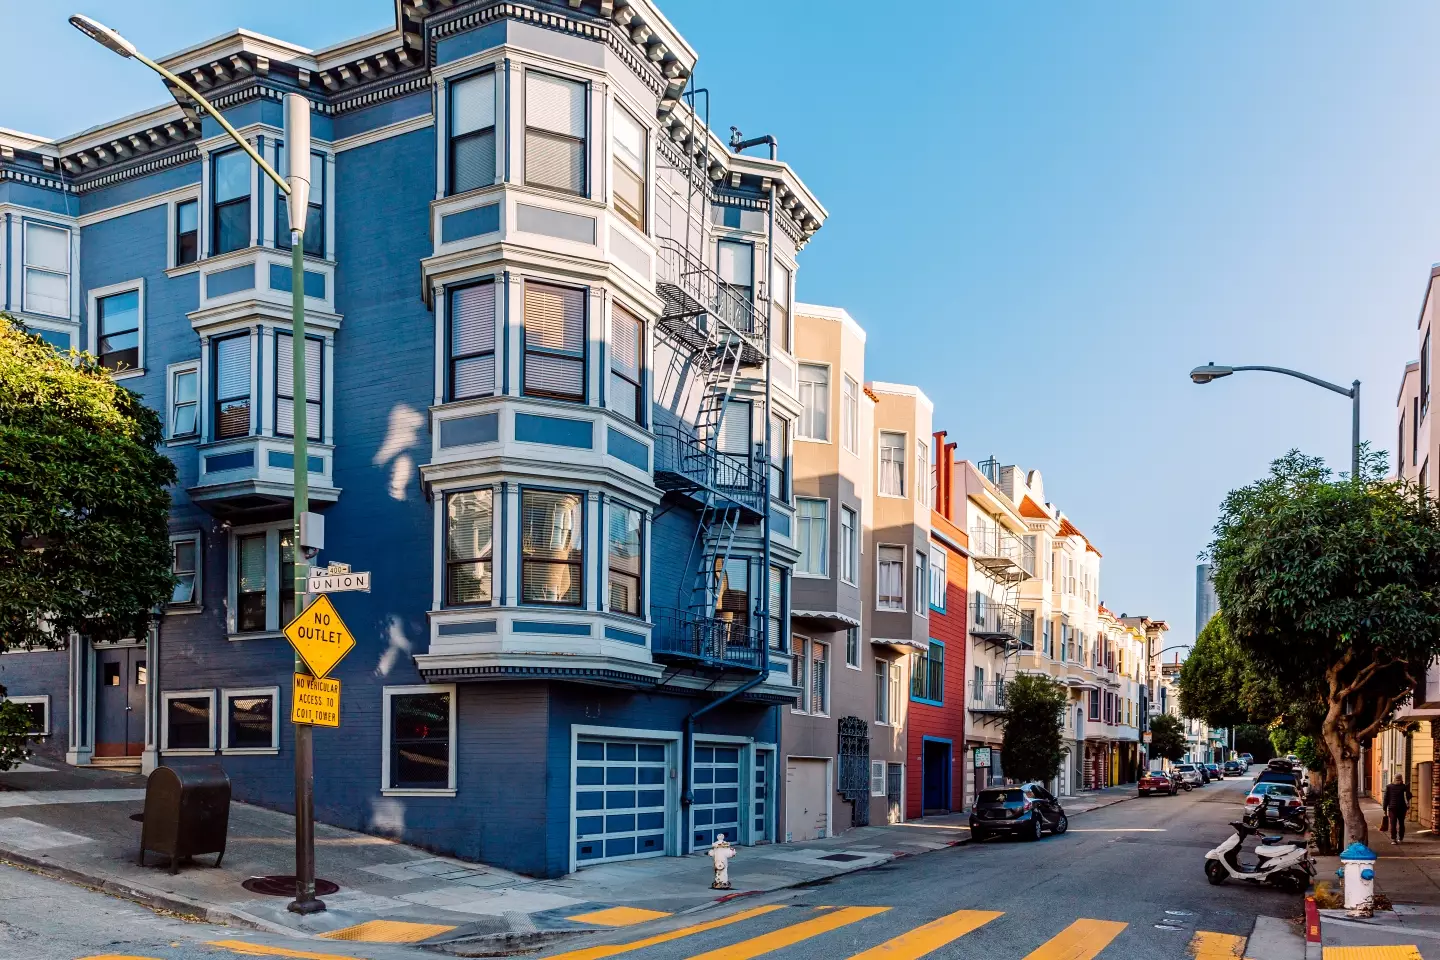 The study found the median house price in San Fransisco is $1,482,500.